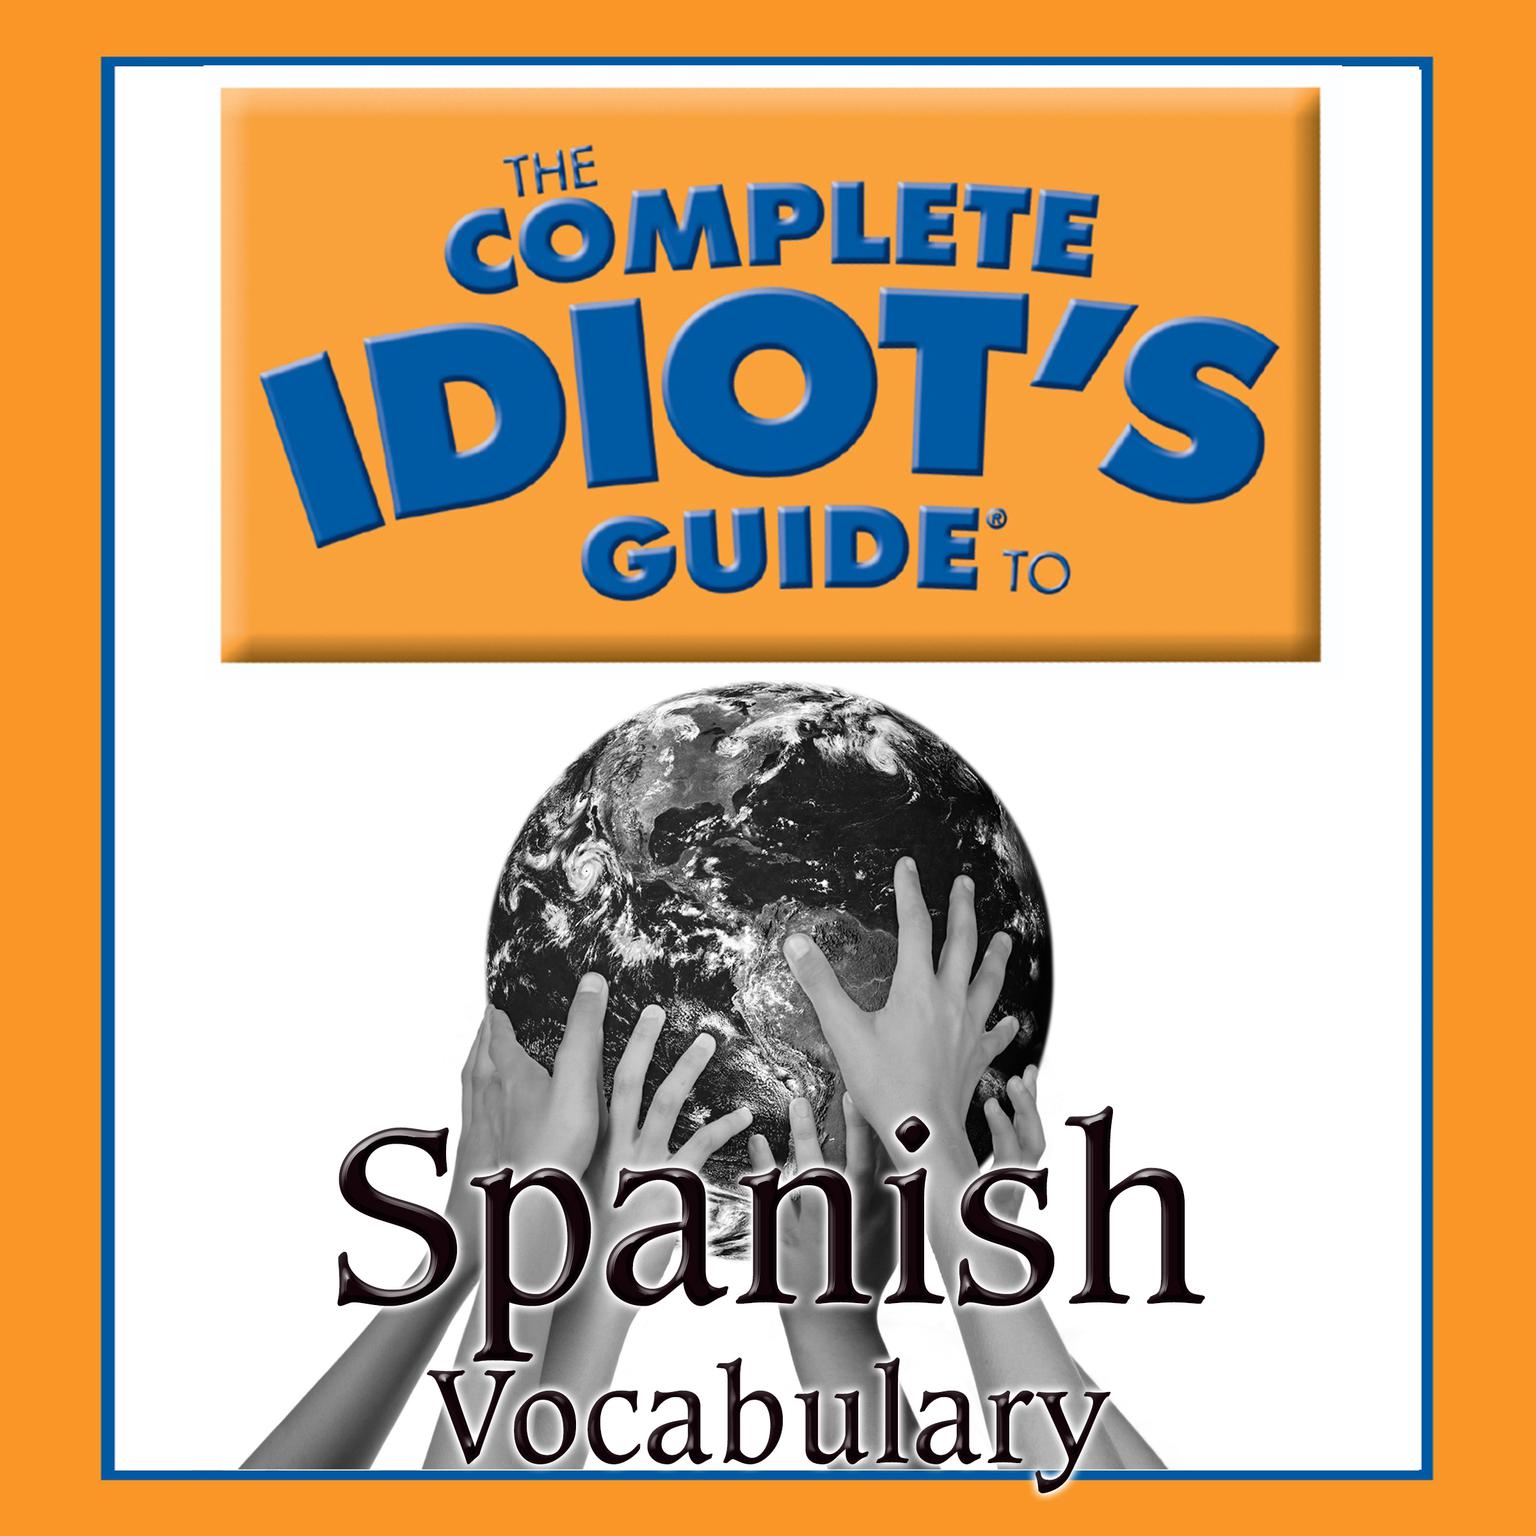 The Complete Idiots Guide to Spanish: Vocabulary Audiobook, by Linguistics Team